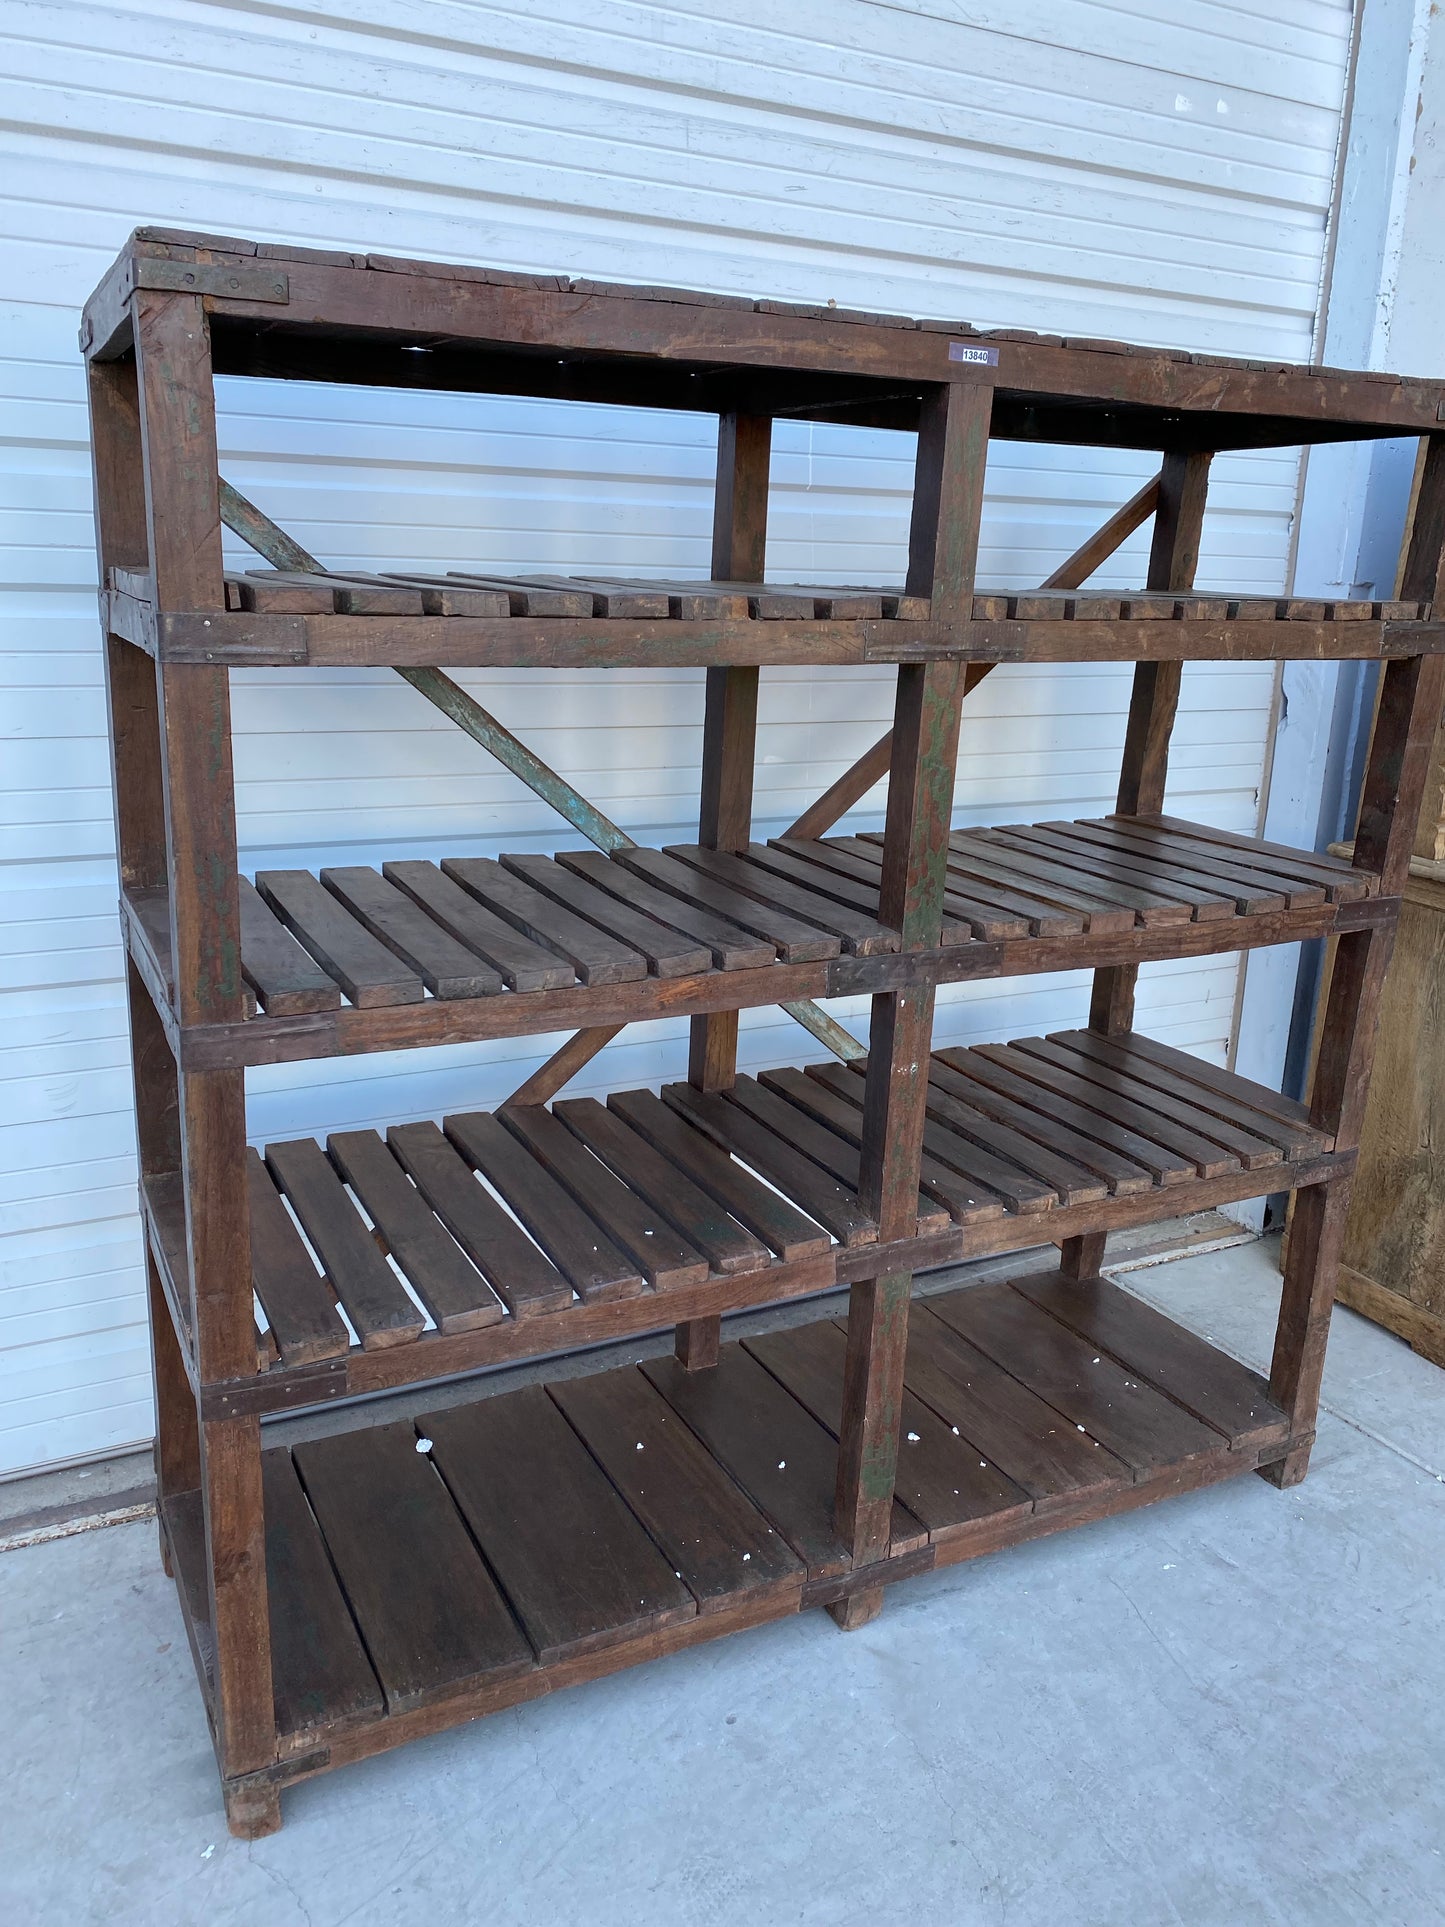 Wood Rack with 4 Shelves